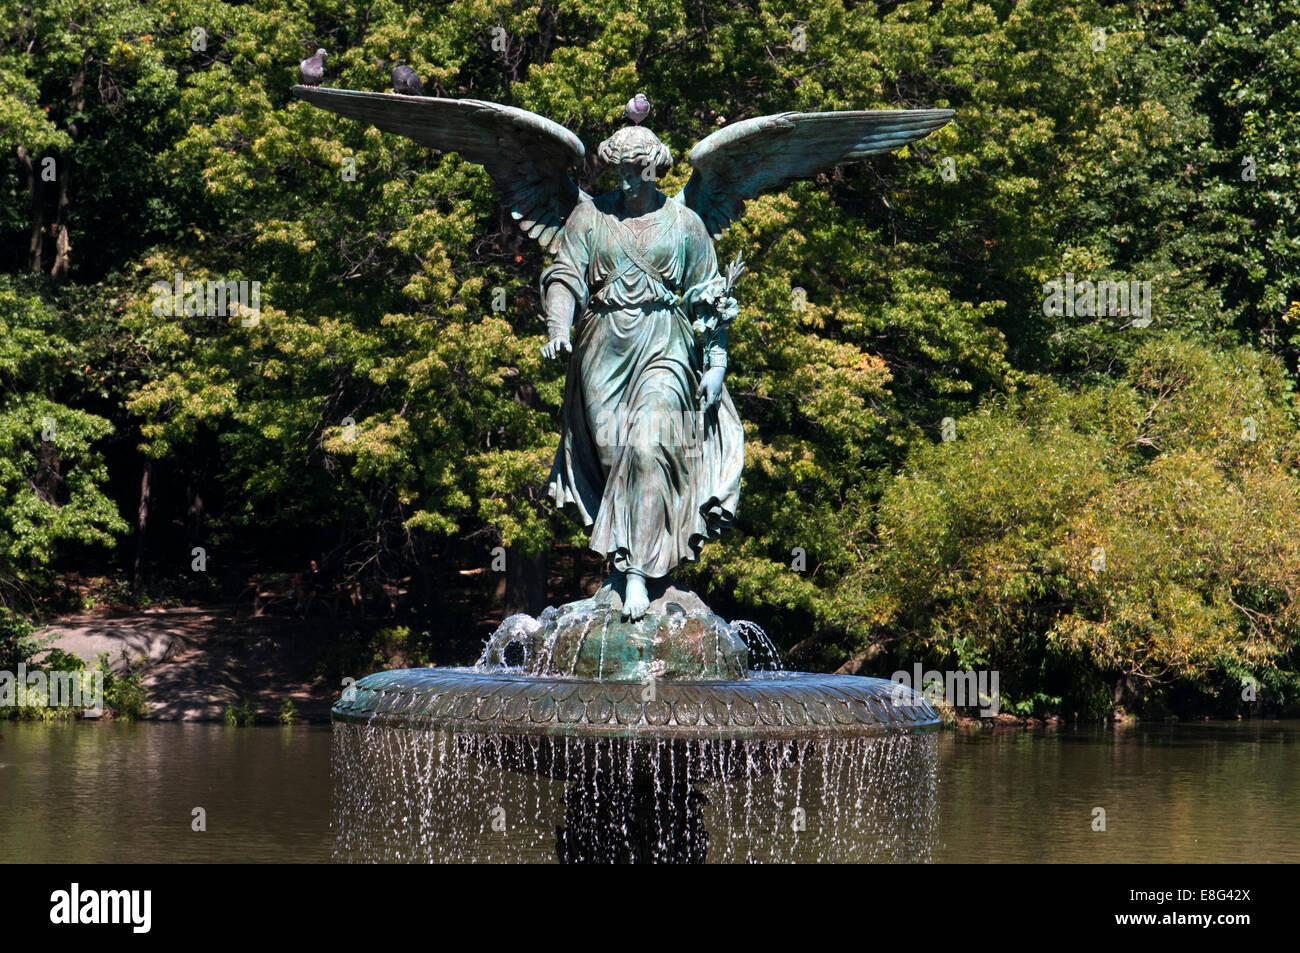 Bethesda Fountain, Central Park, New York City. The sculpture is 